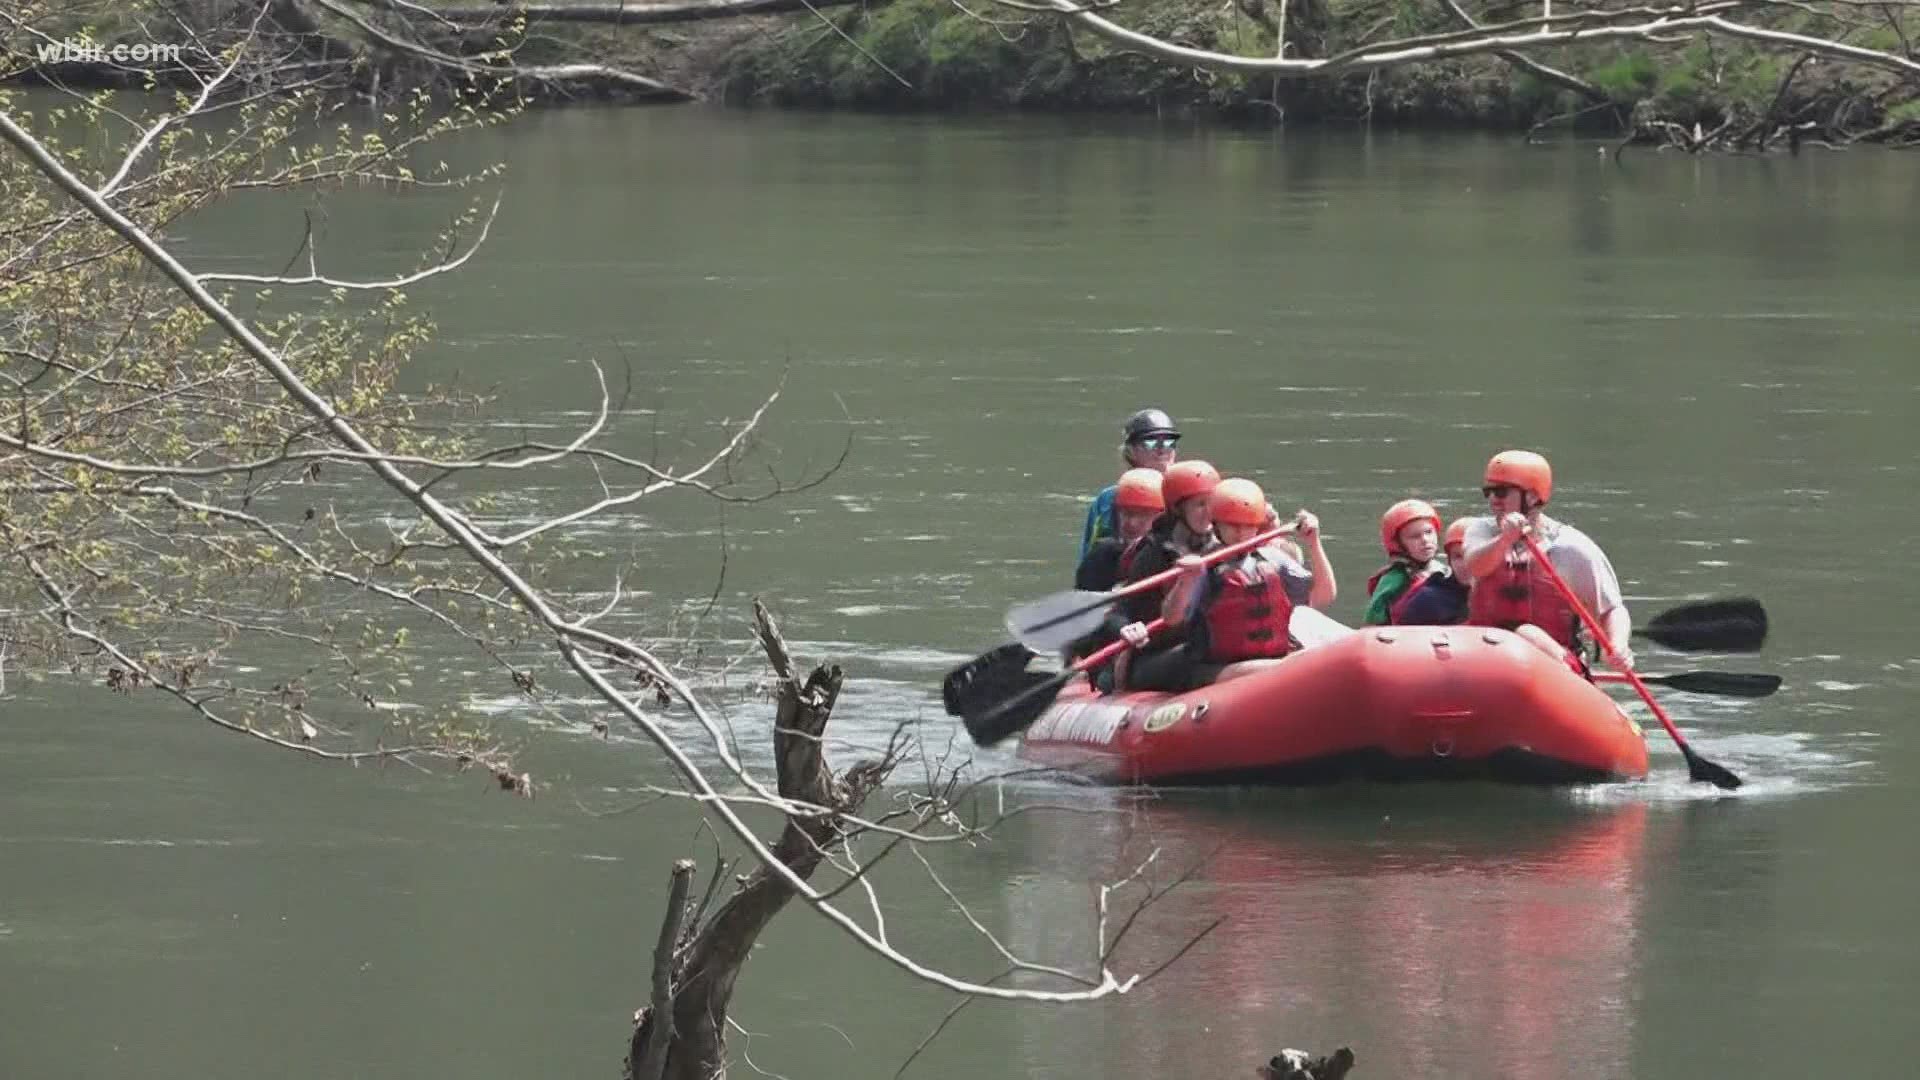 Rafting companies said a hearing next week could decide the fate of the Pigeon River.